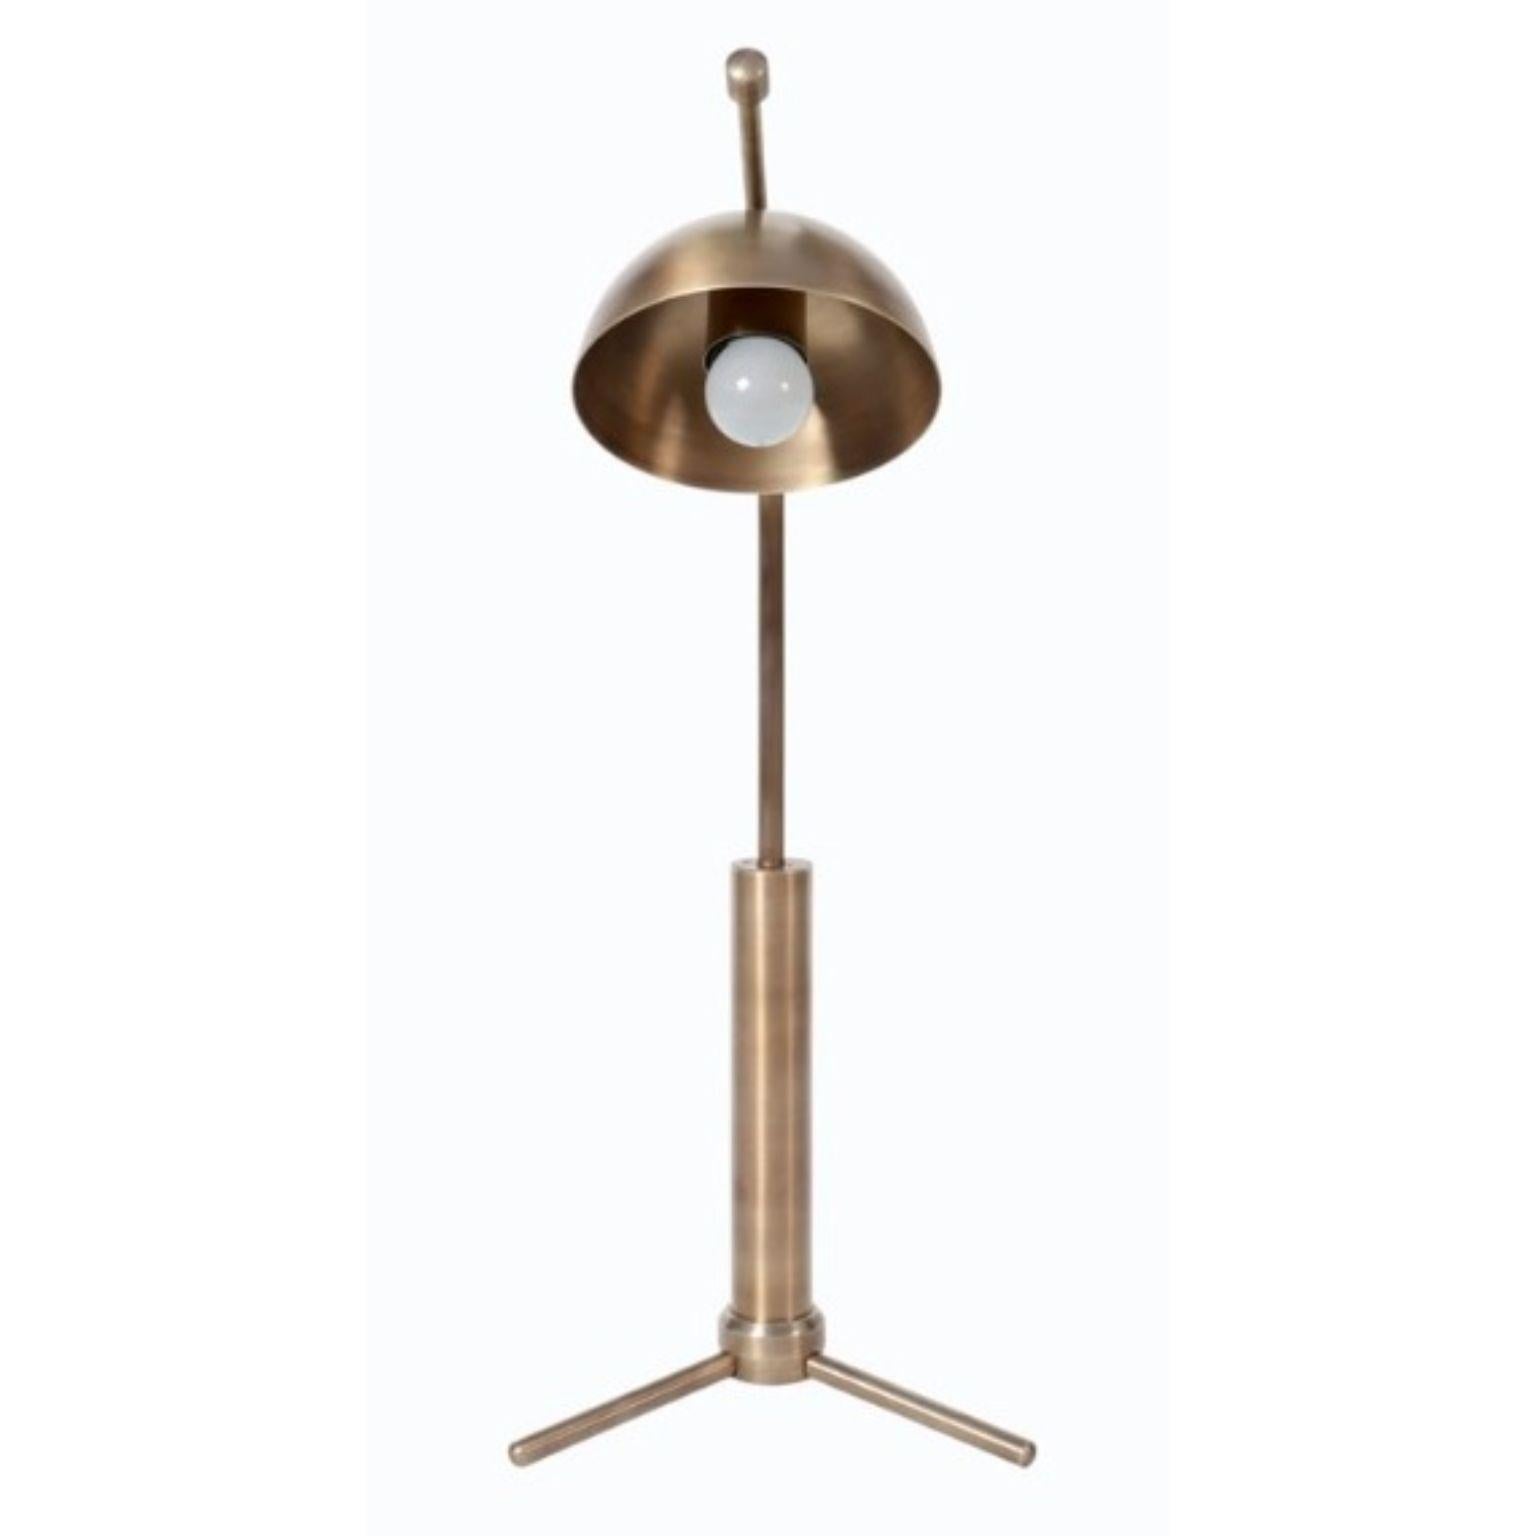 Wing Brass Dome Desk Lamp by Lamp Shaper
Dimensions: D 35.5 x W 35.5 x H 66 cm.
Materials: Brass.

Different finishes available: raw brass, aged brass, burnt brass and brushed brass Please contact us.

All our lamps can be wired according to each